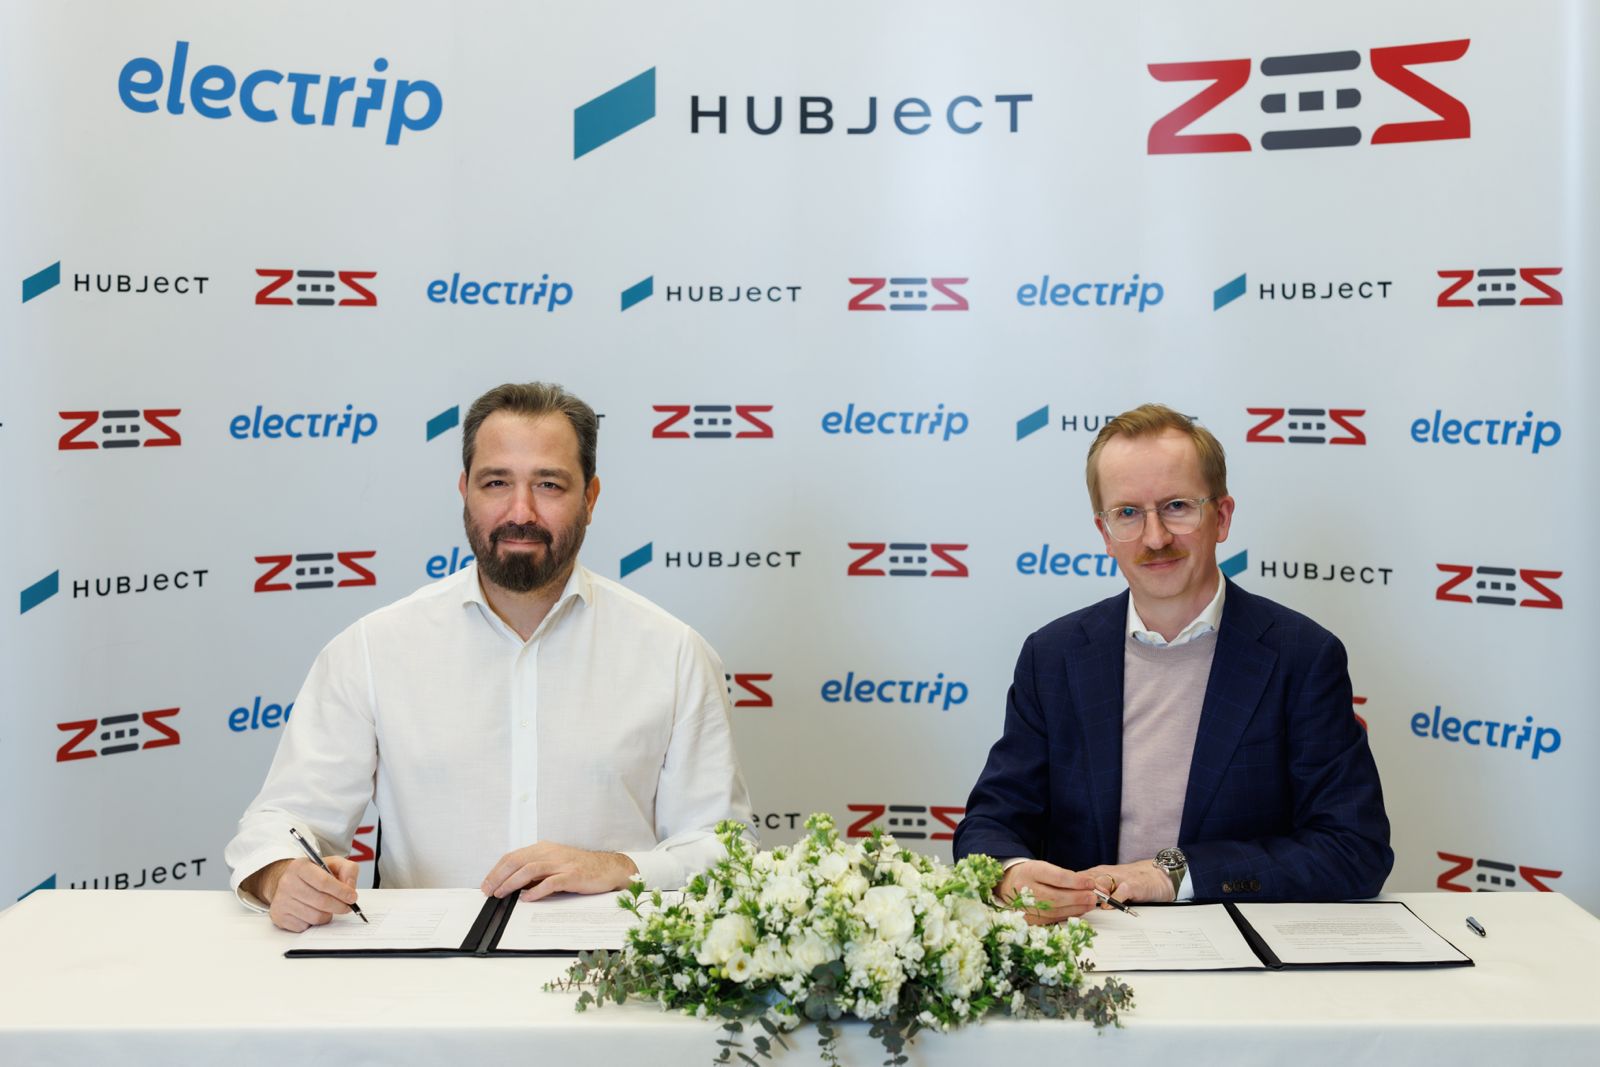 ZES and electrip join Hubject’s global intercharge roaming network